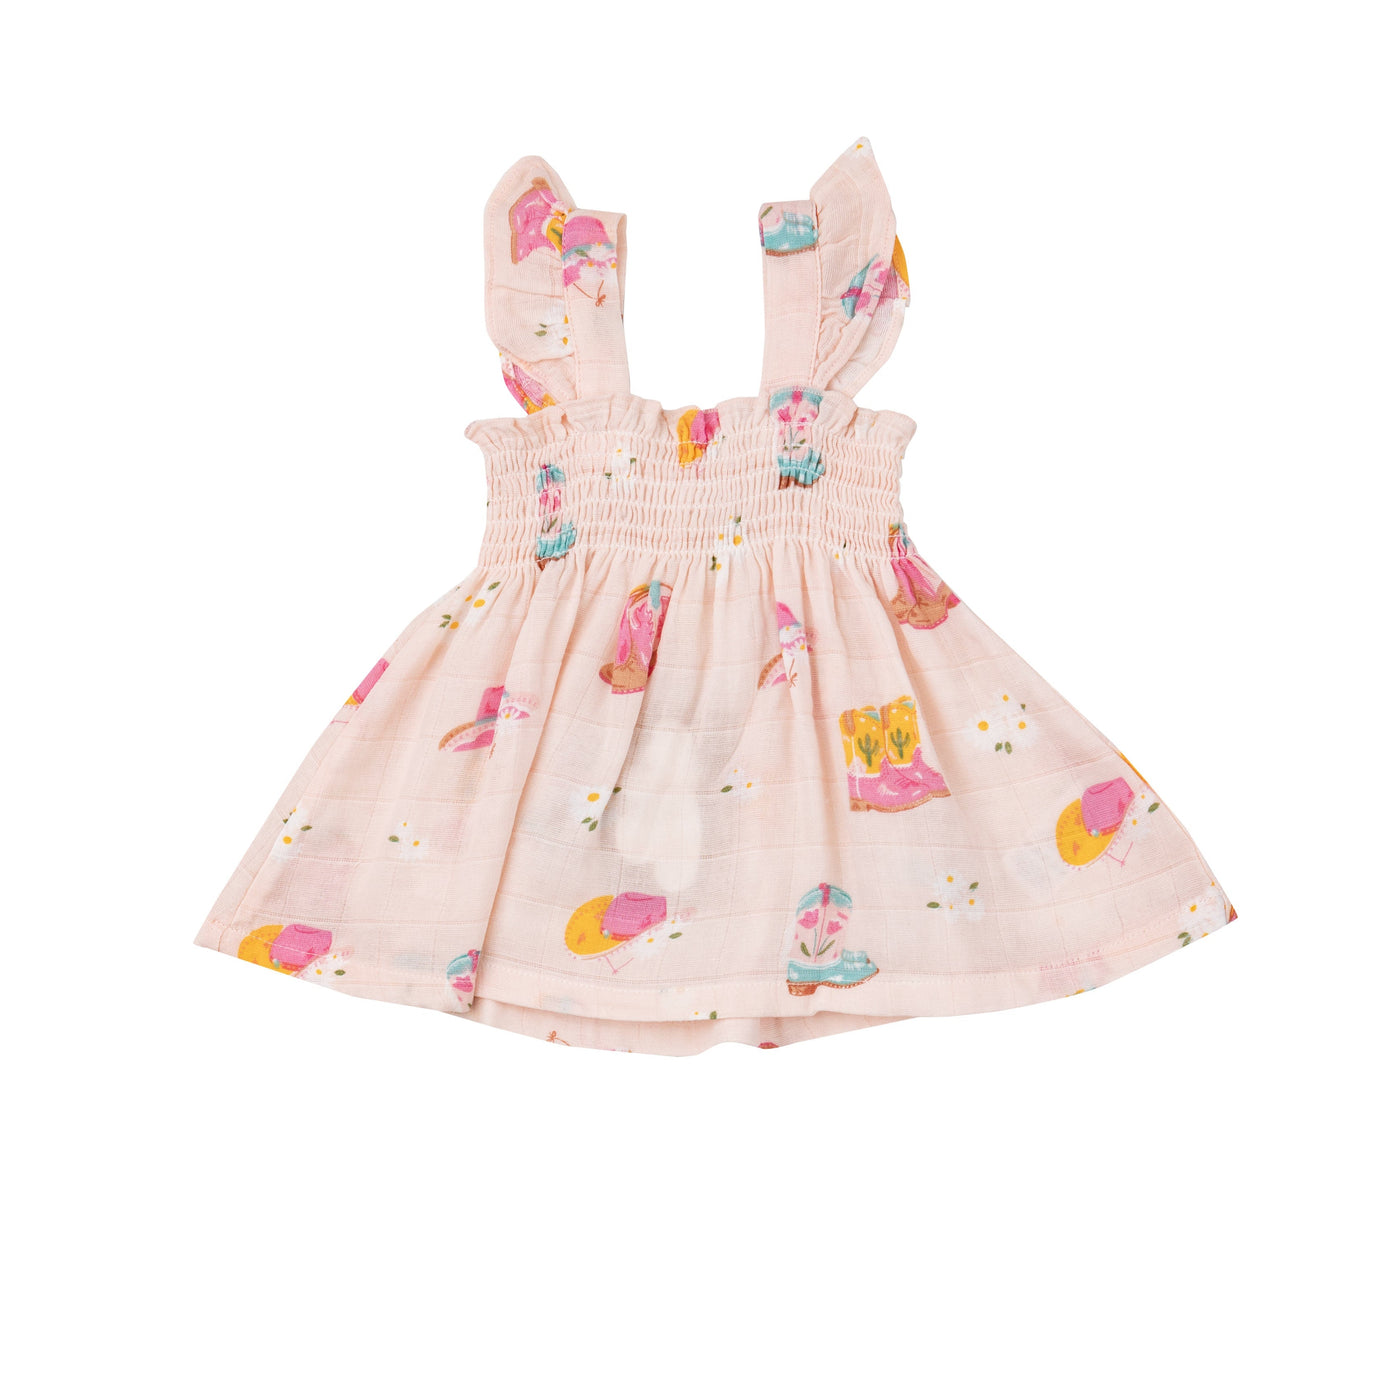 Ruffle Strap Smocked Top And Diaper Cover - Daisy Boots - Angel Dear